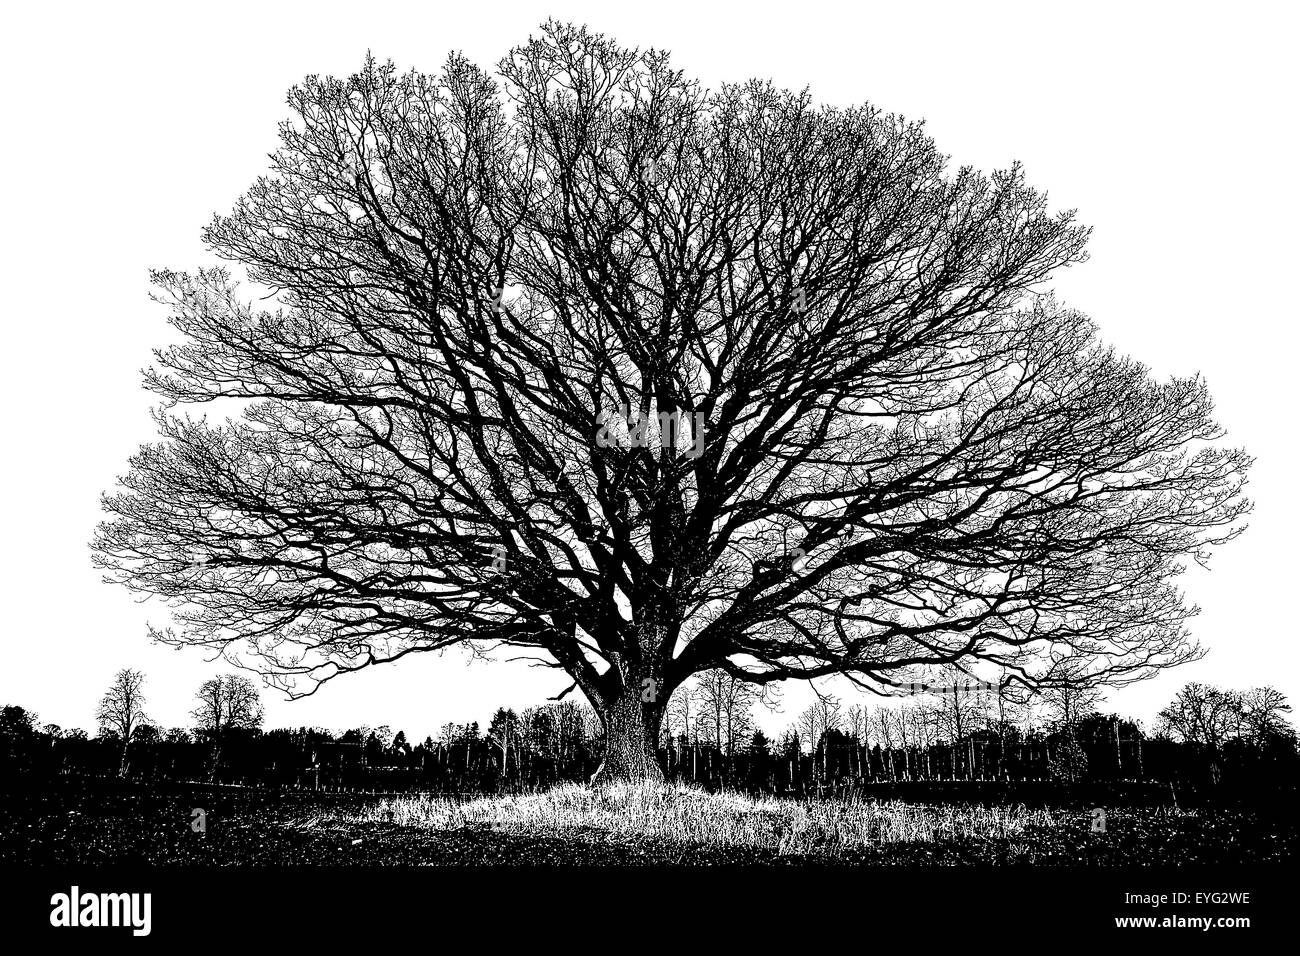 Old giant oak tree, English oak, with winter leafless branches in silhouette as pen and ink black and white, artistic illustration directly from photo Stock Photo